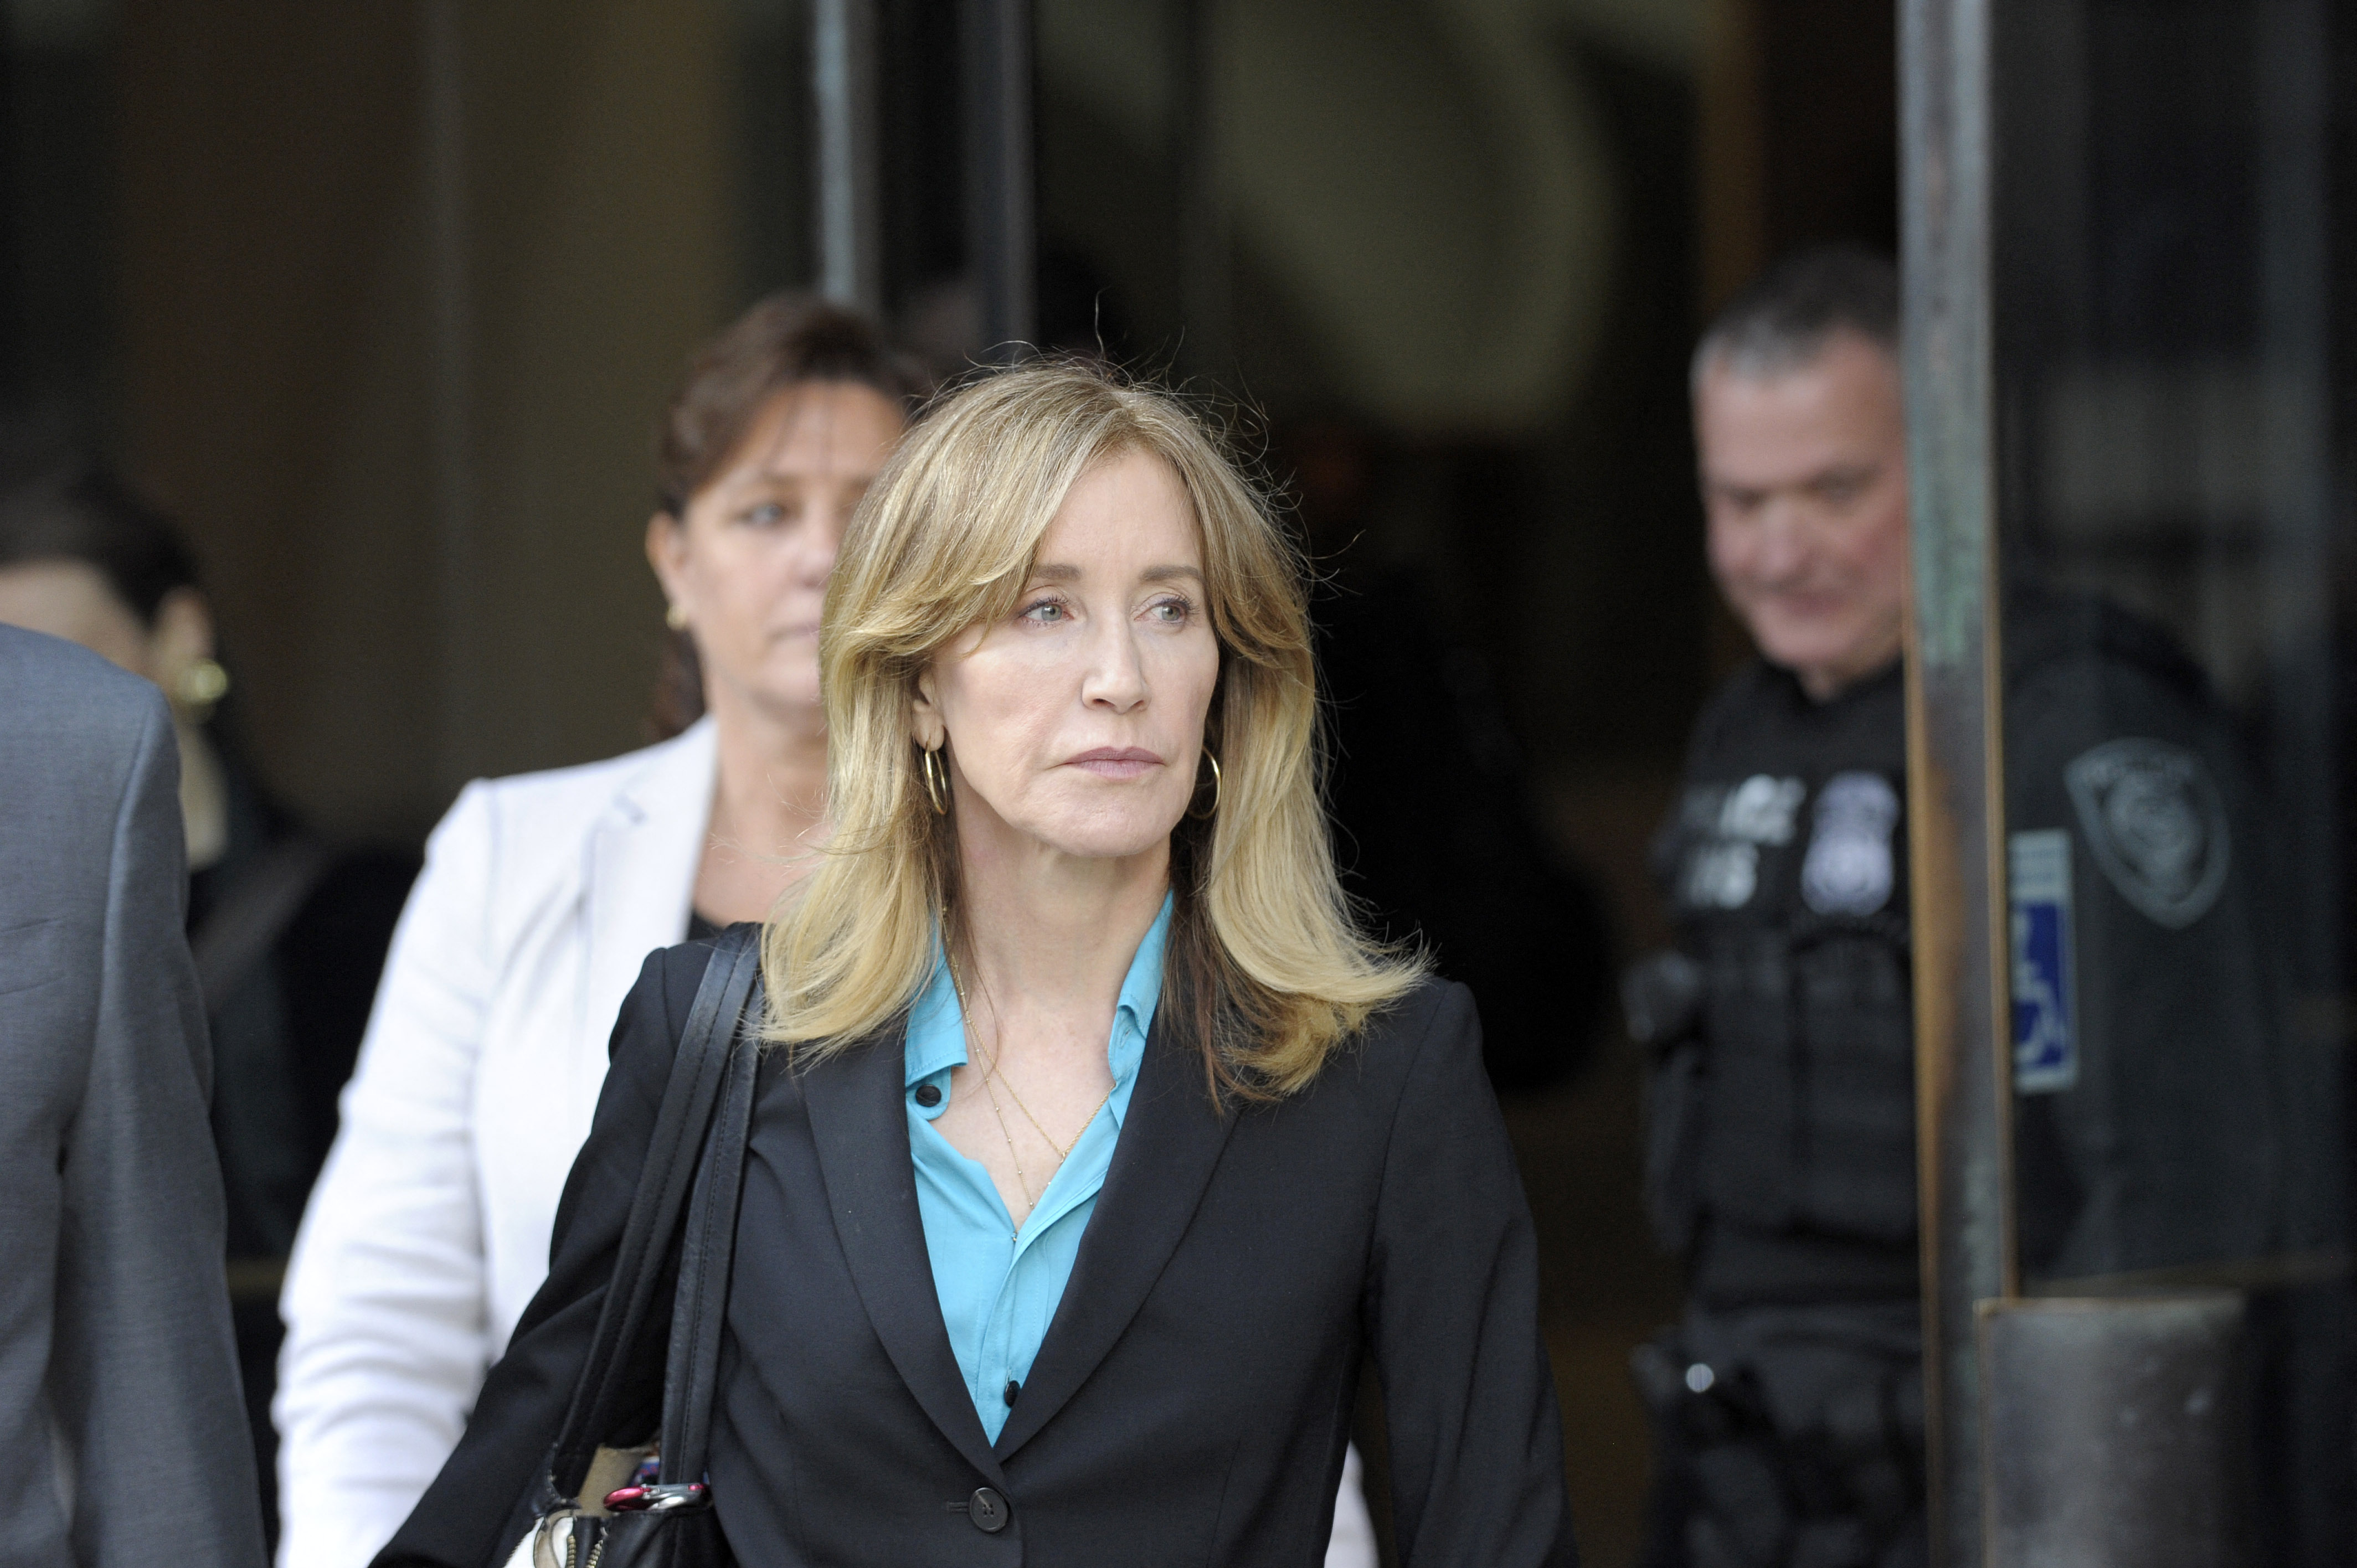 Felicity Huffman exits the courthouse on April 3, 2019 in Boston, Massachusetts. | Source: Getty Images